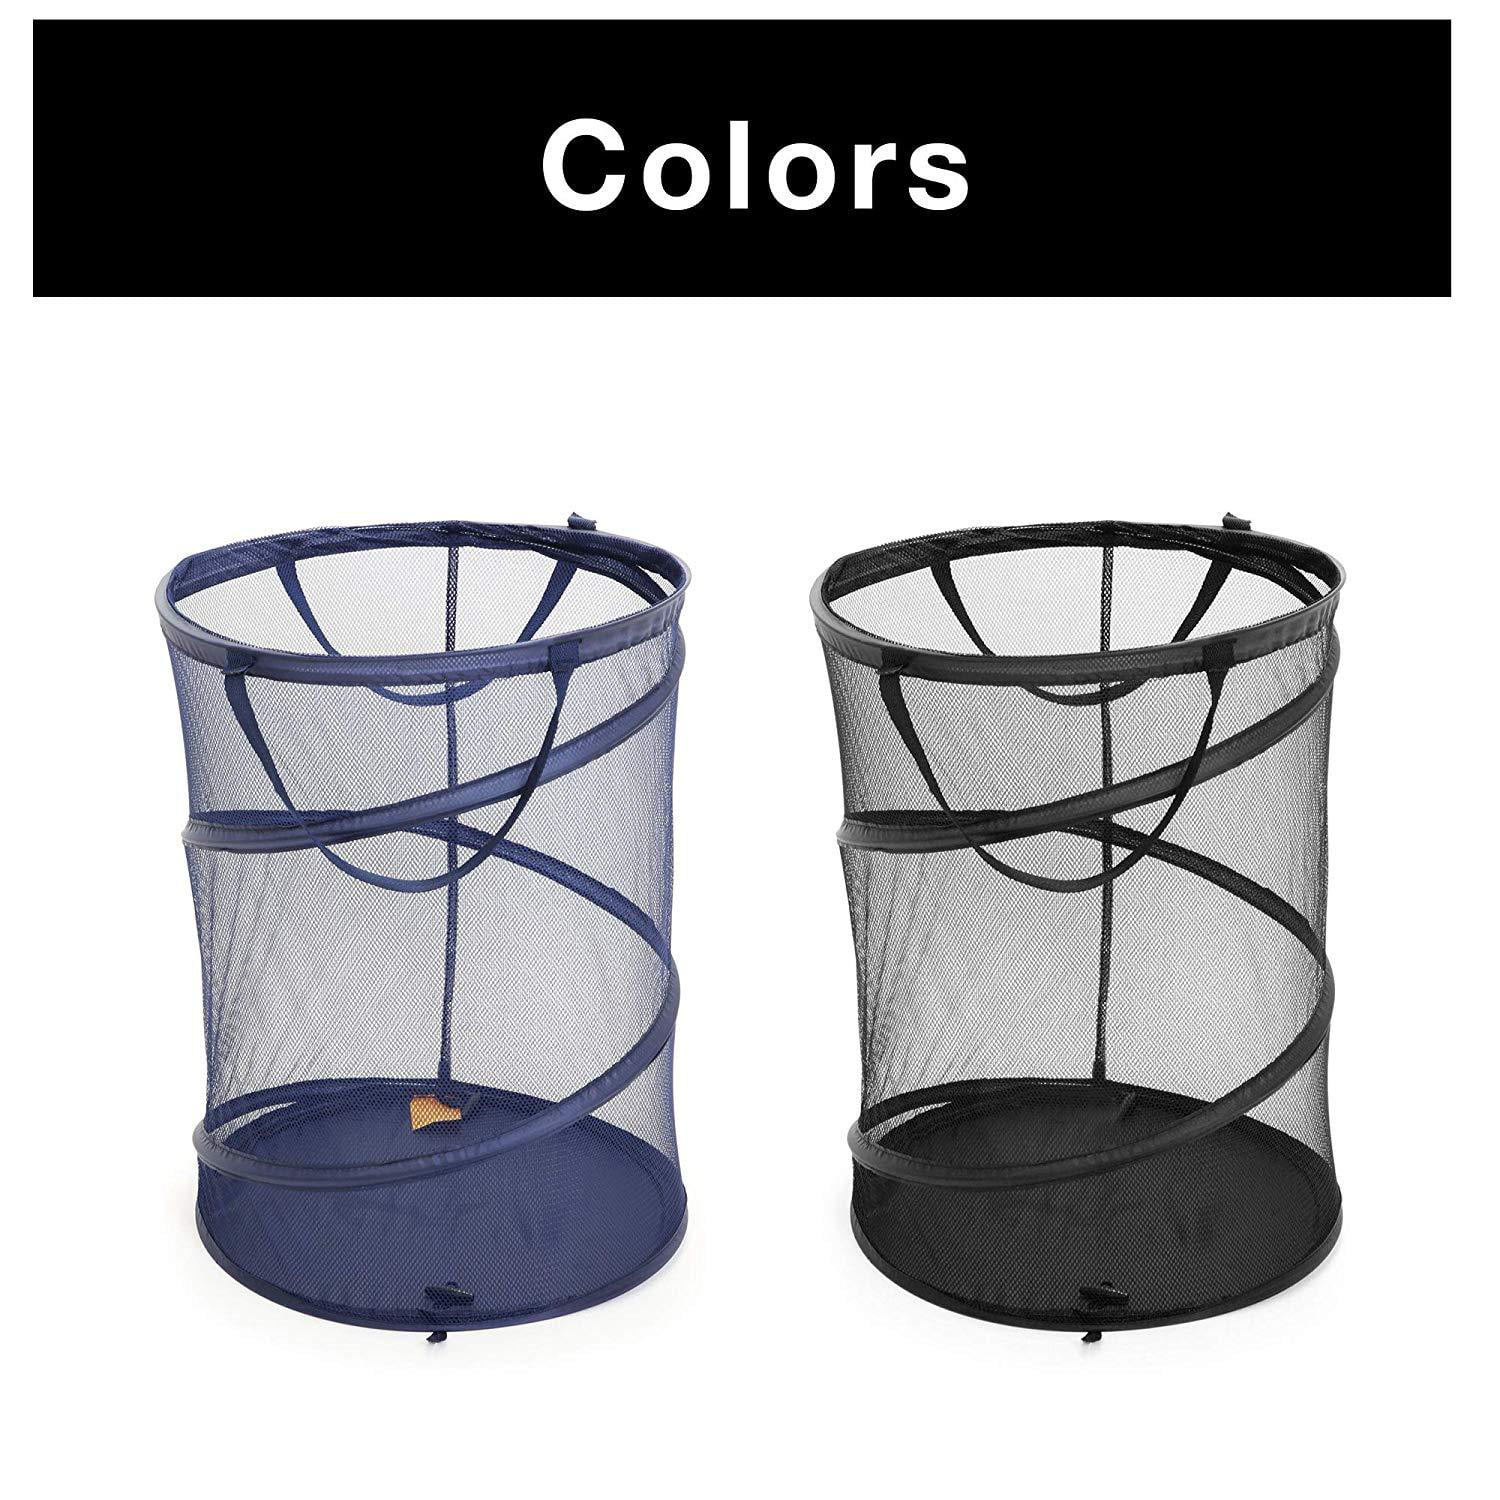 1pc Mesh Collapsible Small Wall Laundry Baskets,Hanging Laundry Hamper,for  Hotel, University Dormitory Use by HHSSALIN